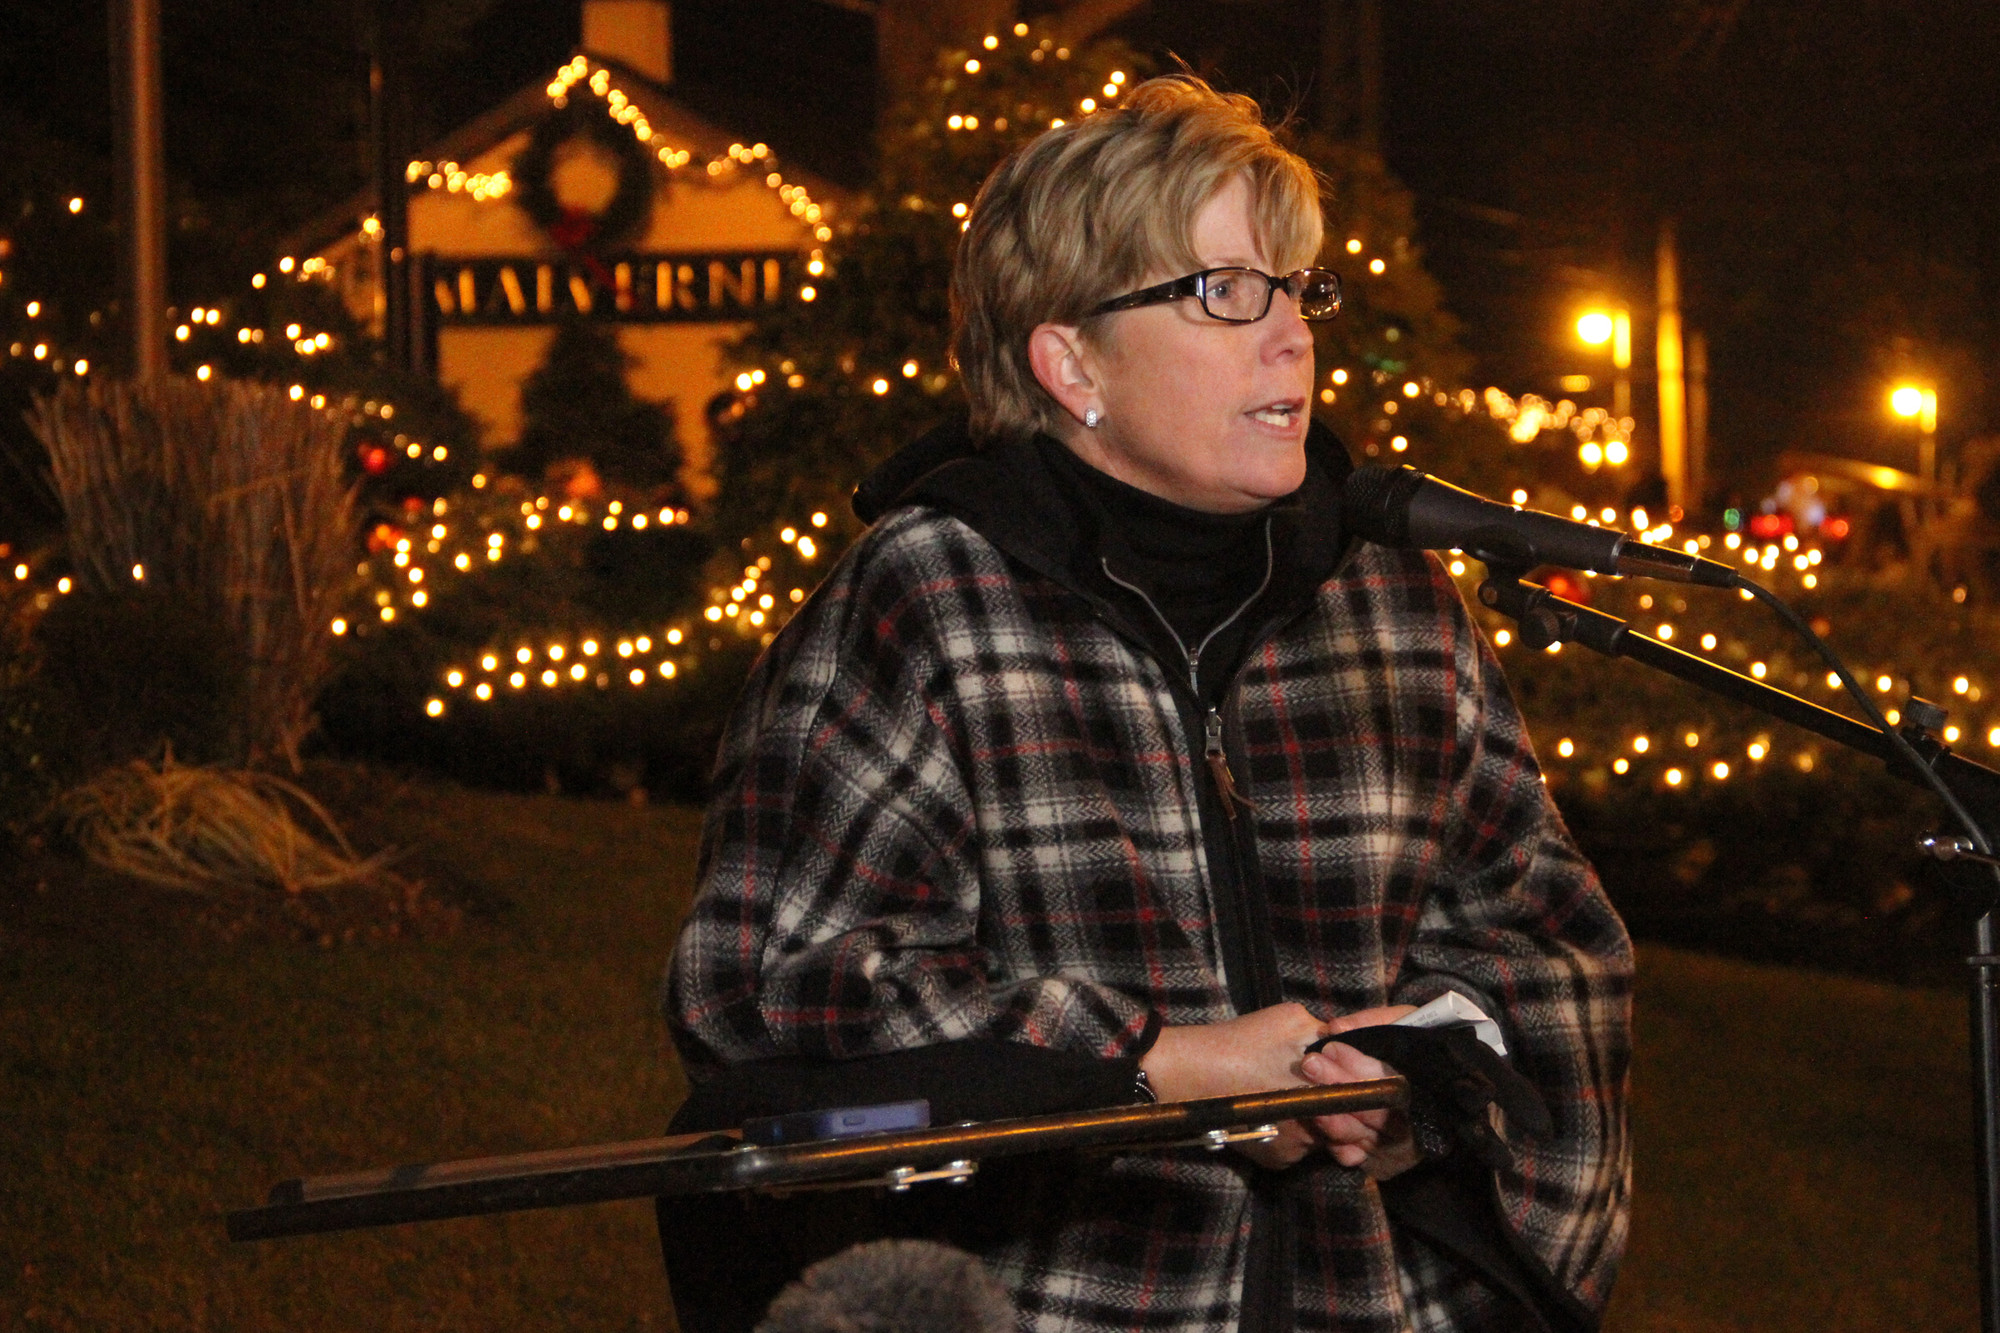 Mayor Patti McDonald welcomed residents and visitors to the Lighting of Malverne on Dec. 7.